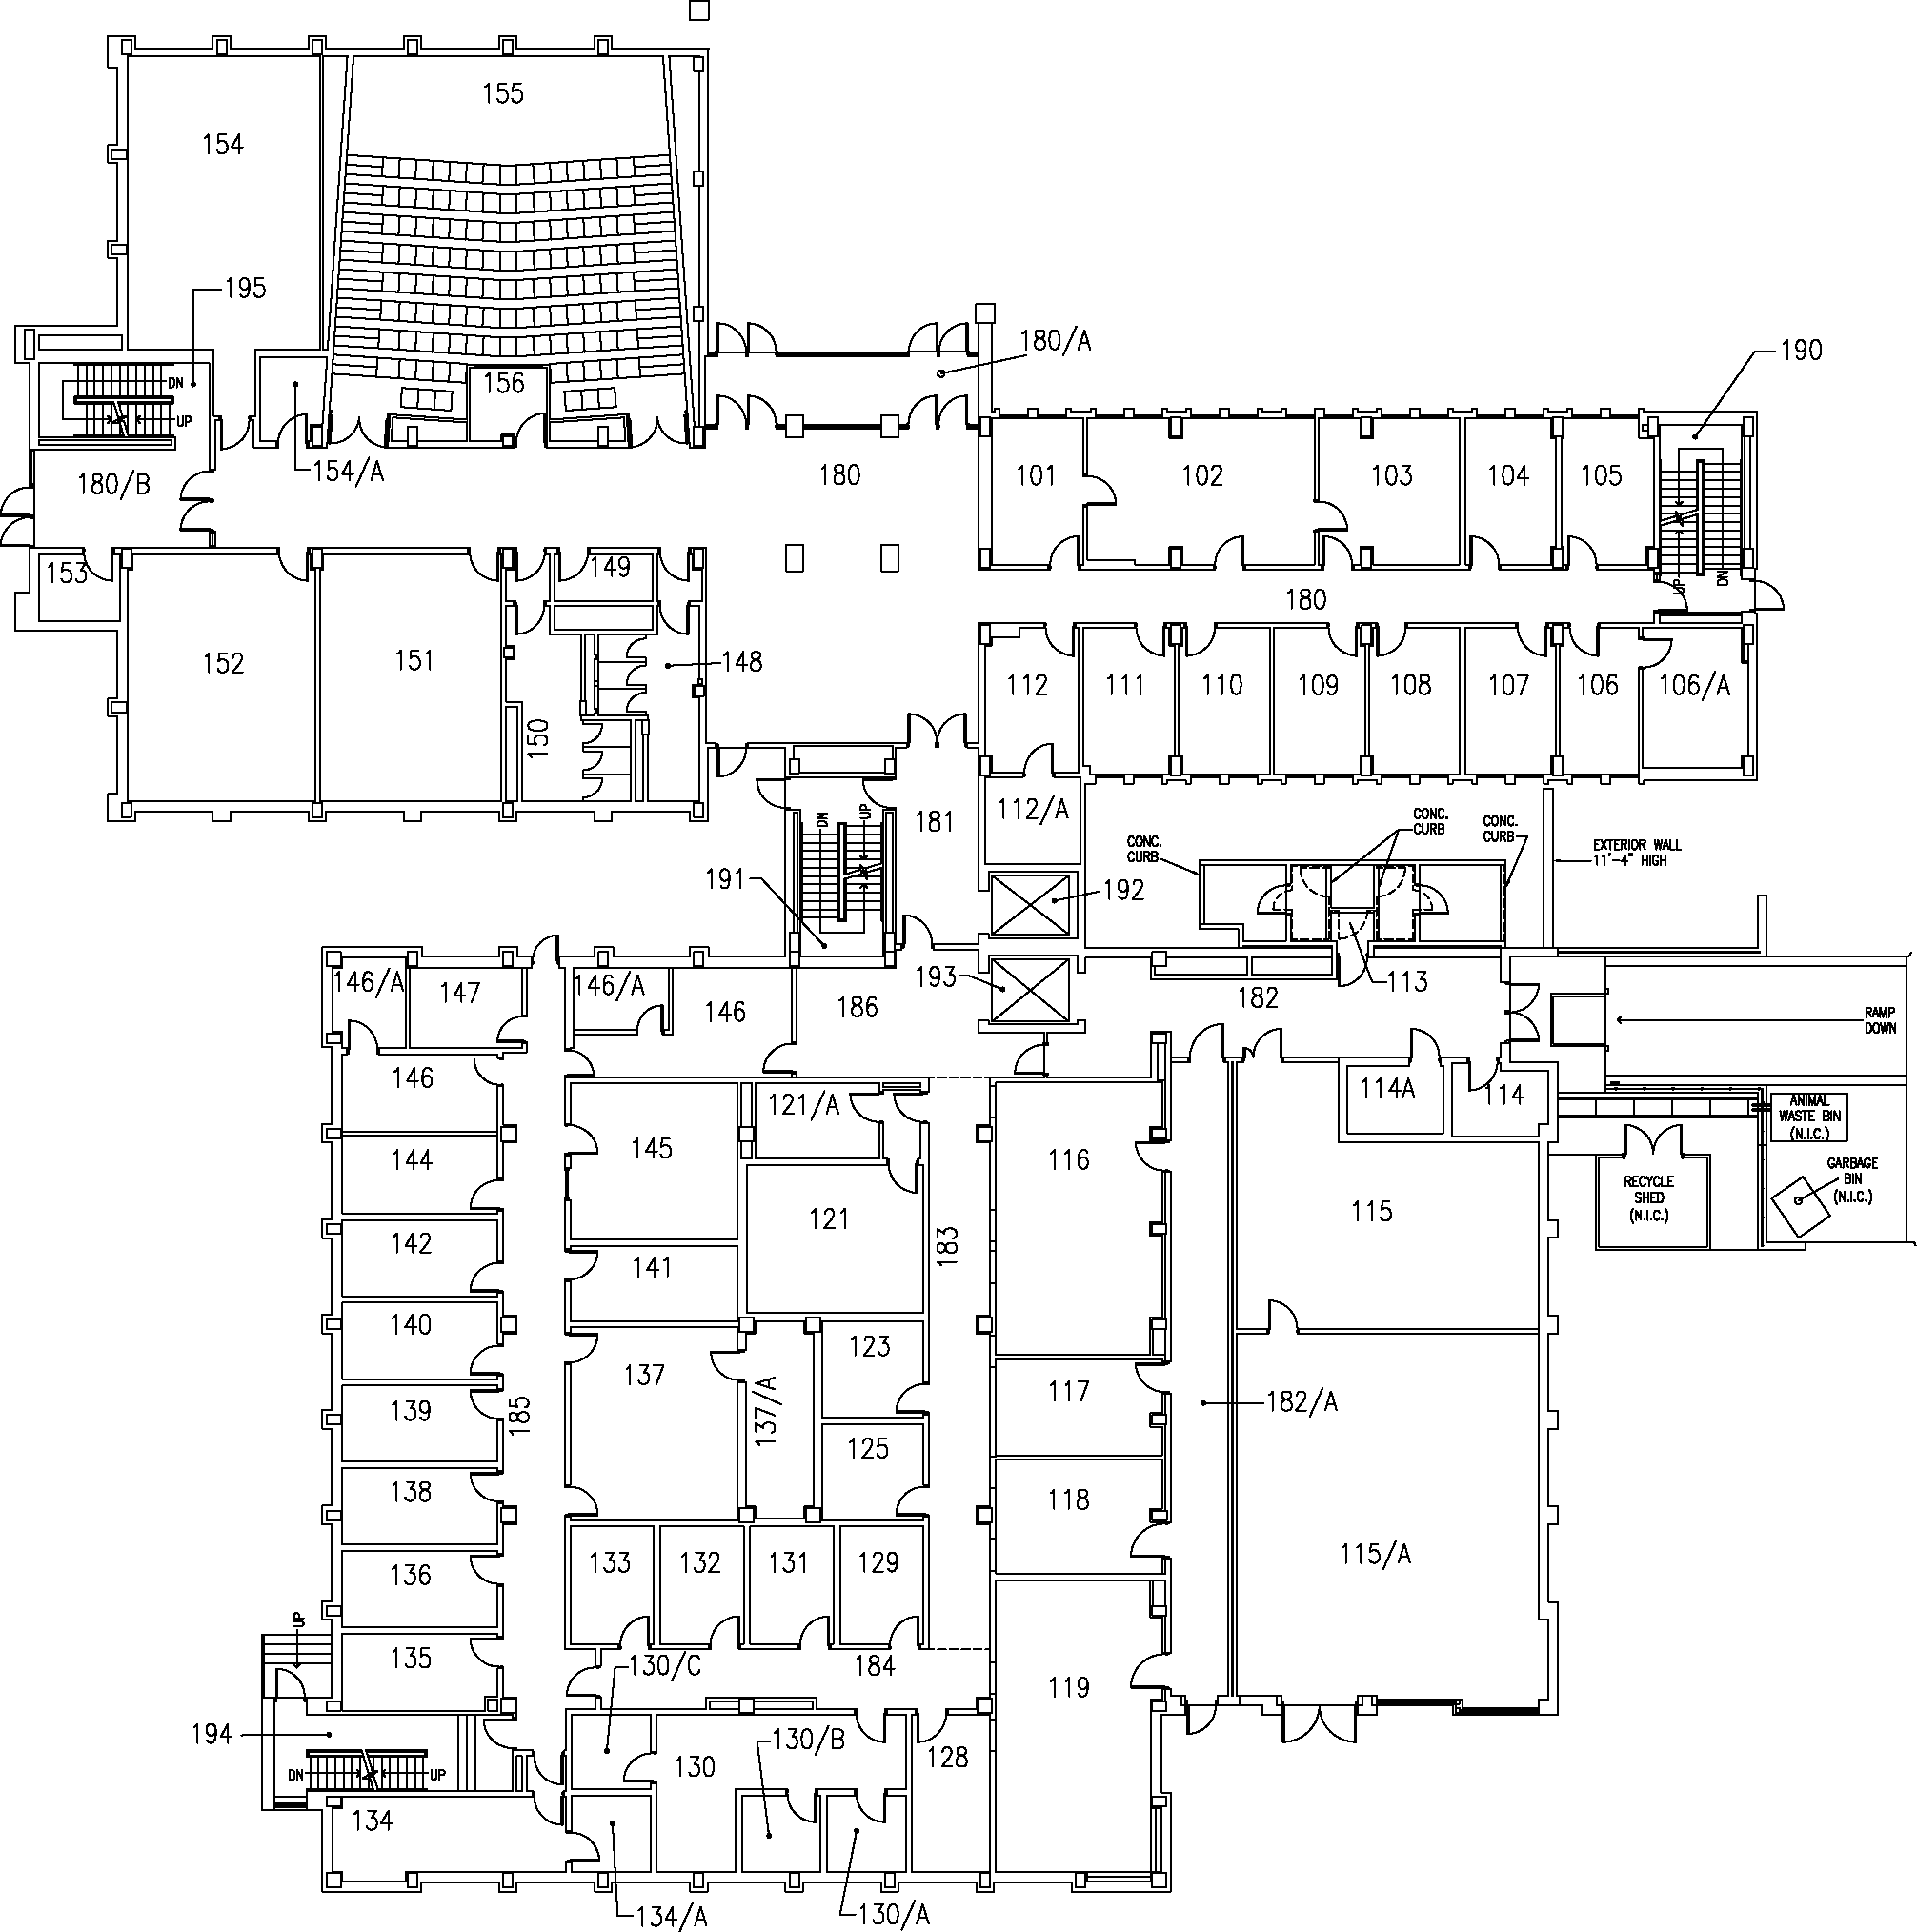 Mcmaster University Psychology Building First Floor Map 